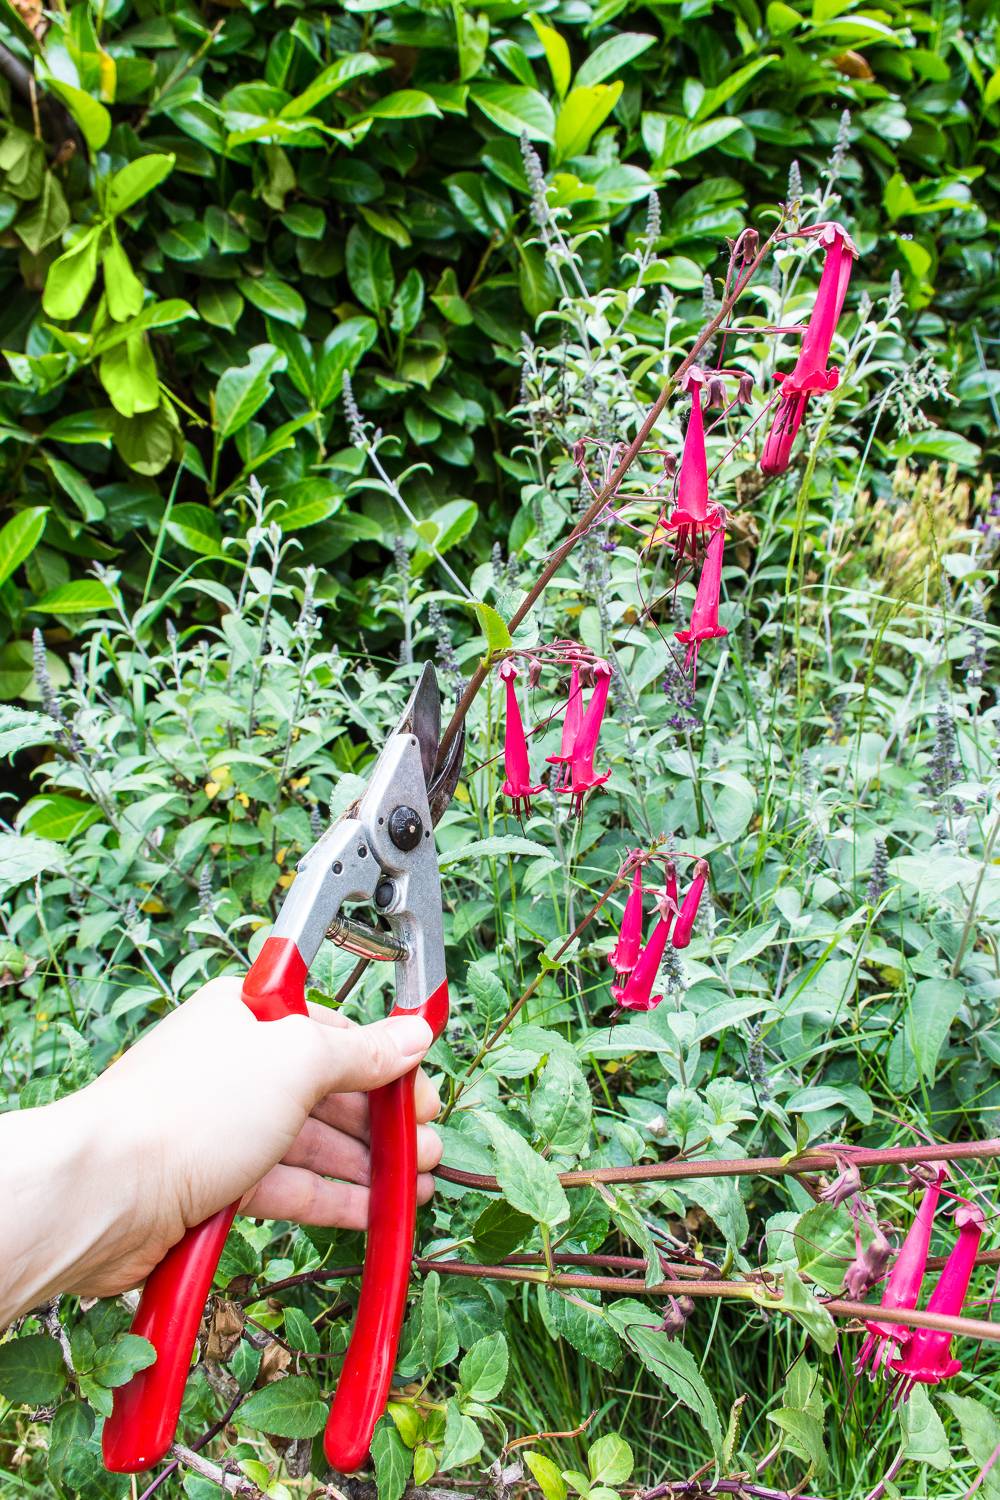 How to clean and sharpen garden tools for your summer gardening